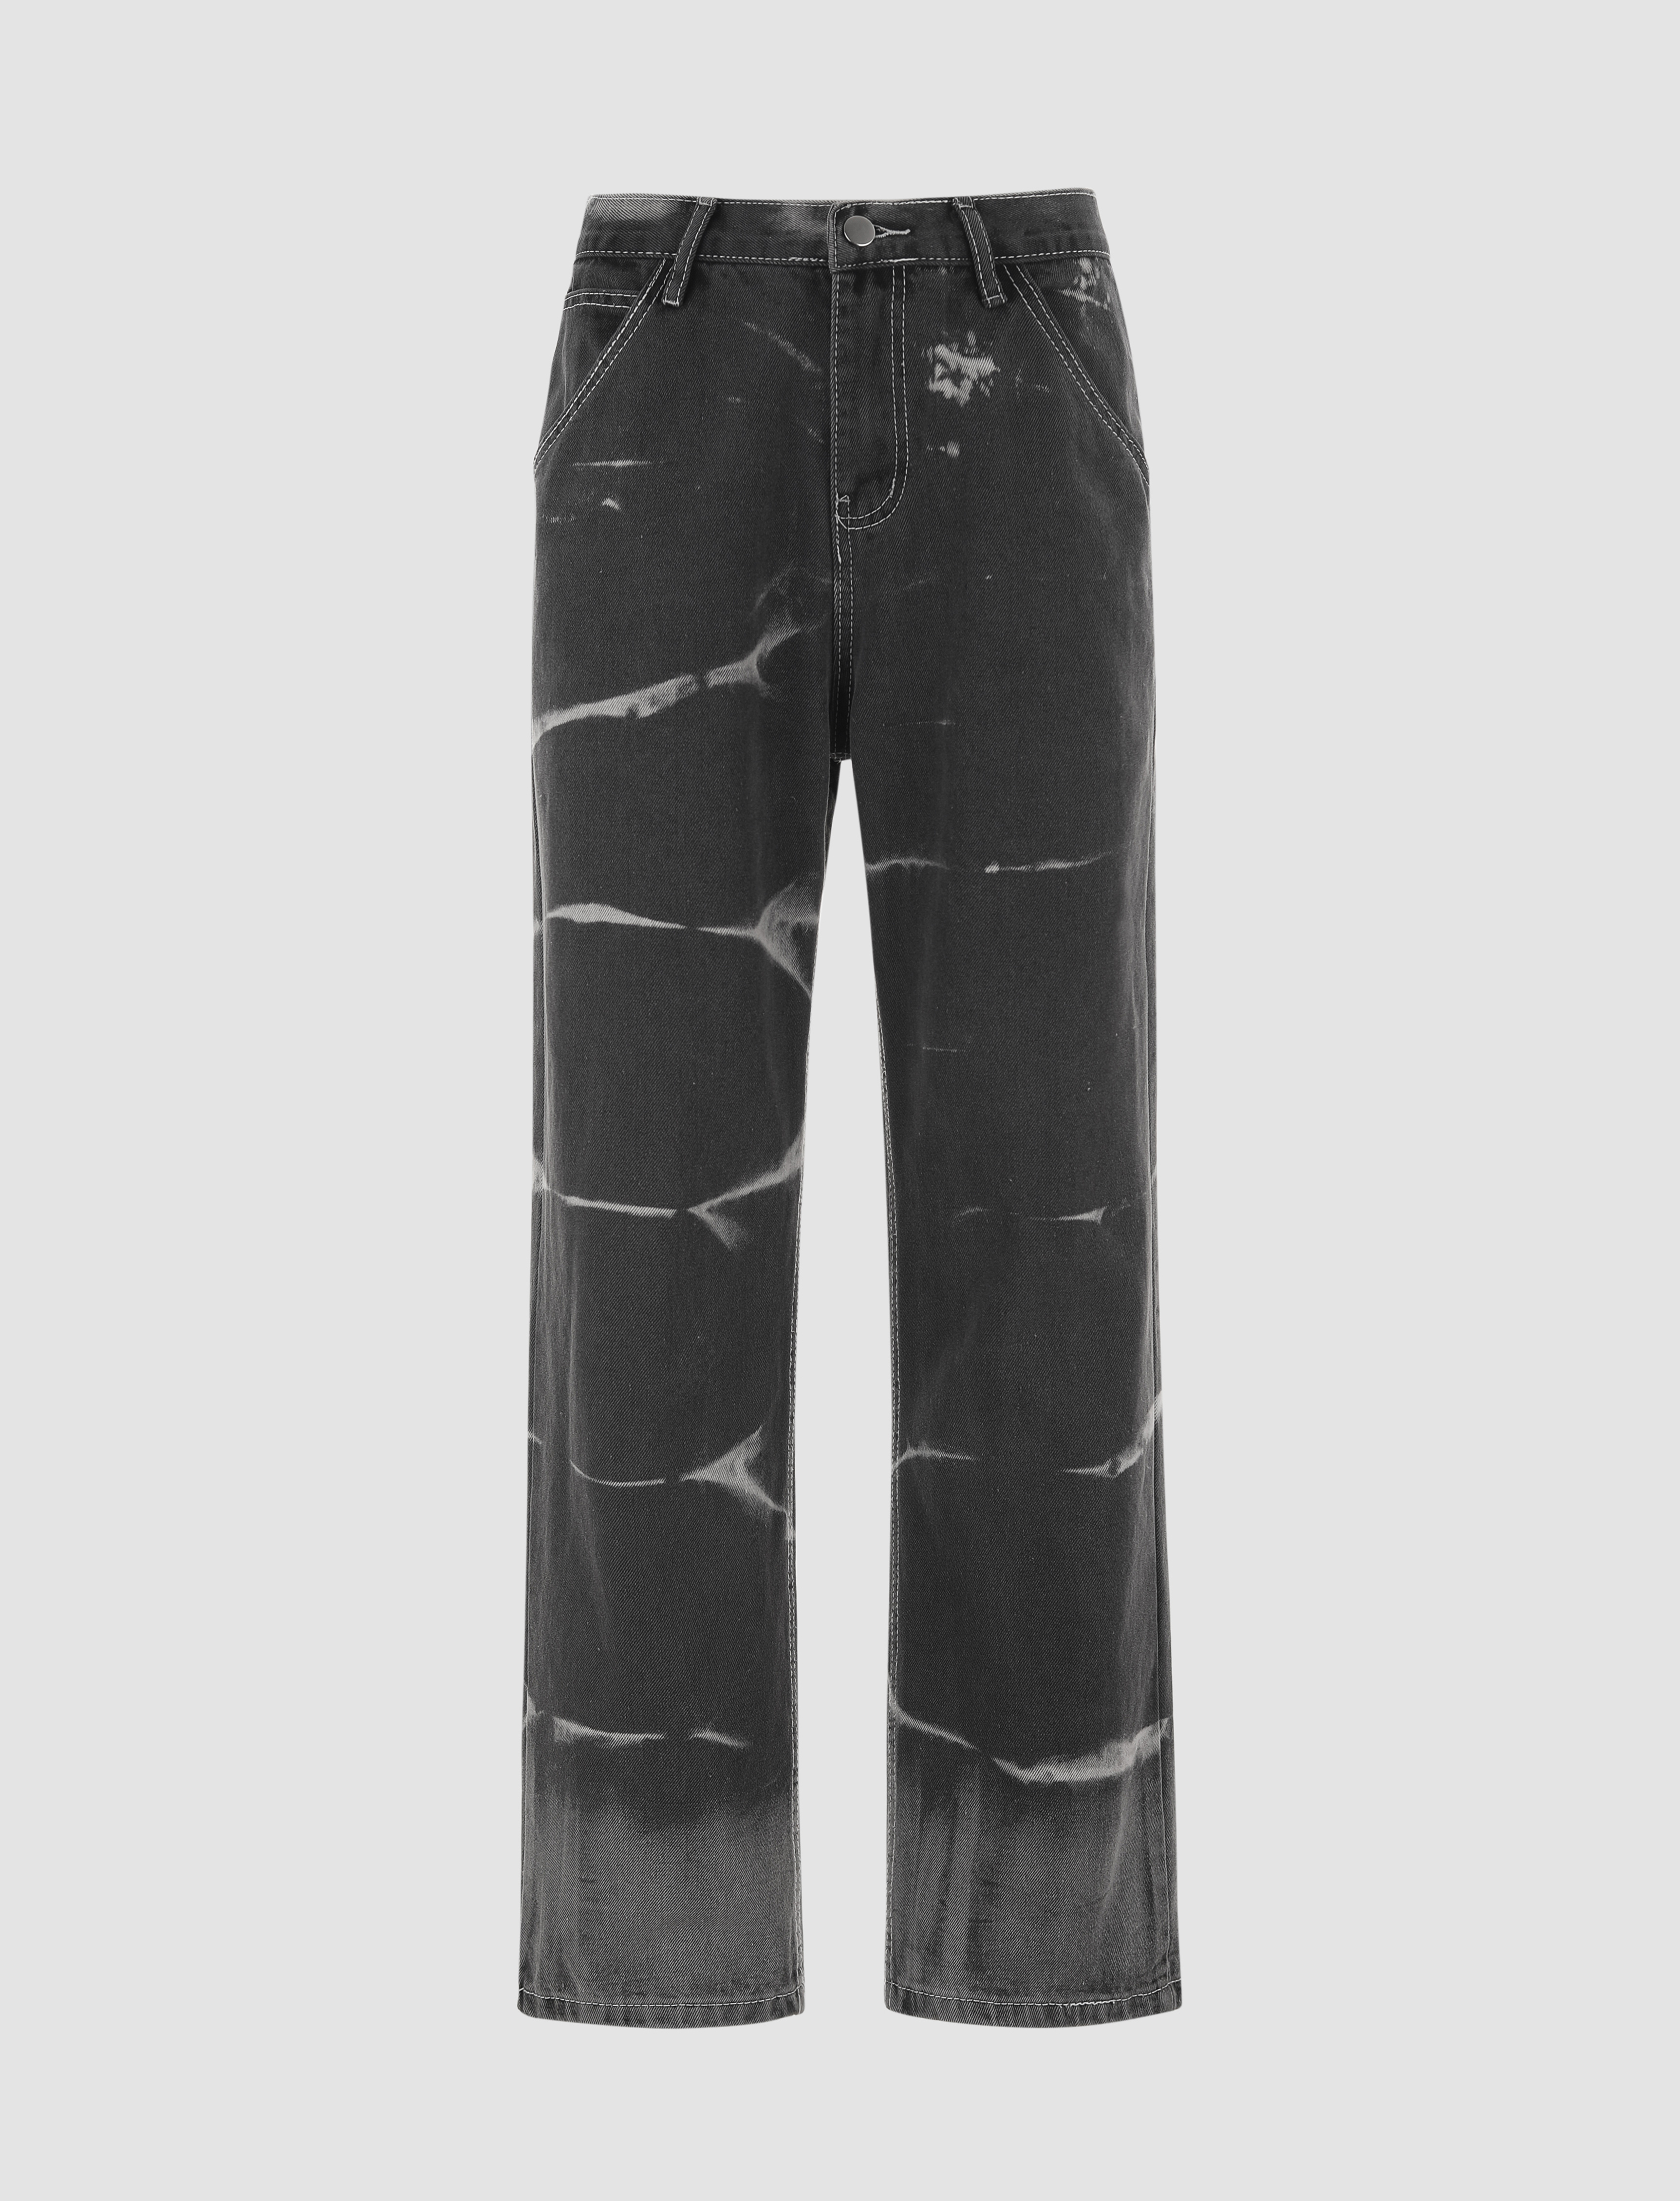 Black Bleached Out Jeans - Cider